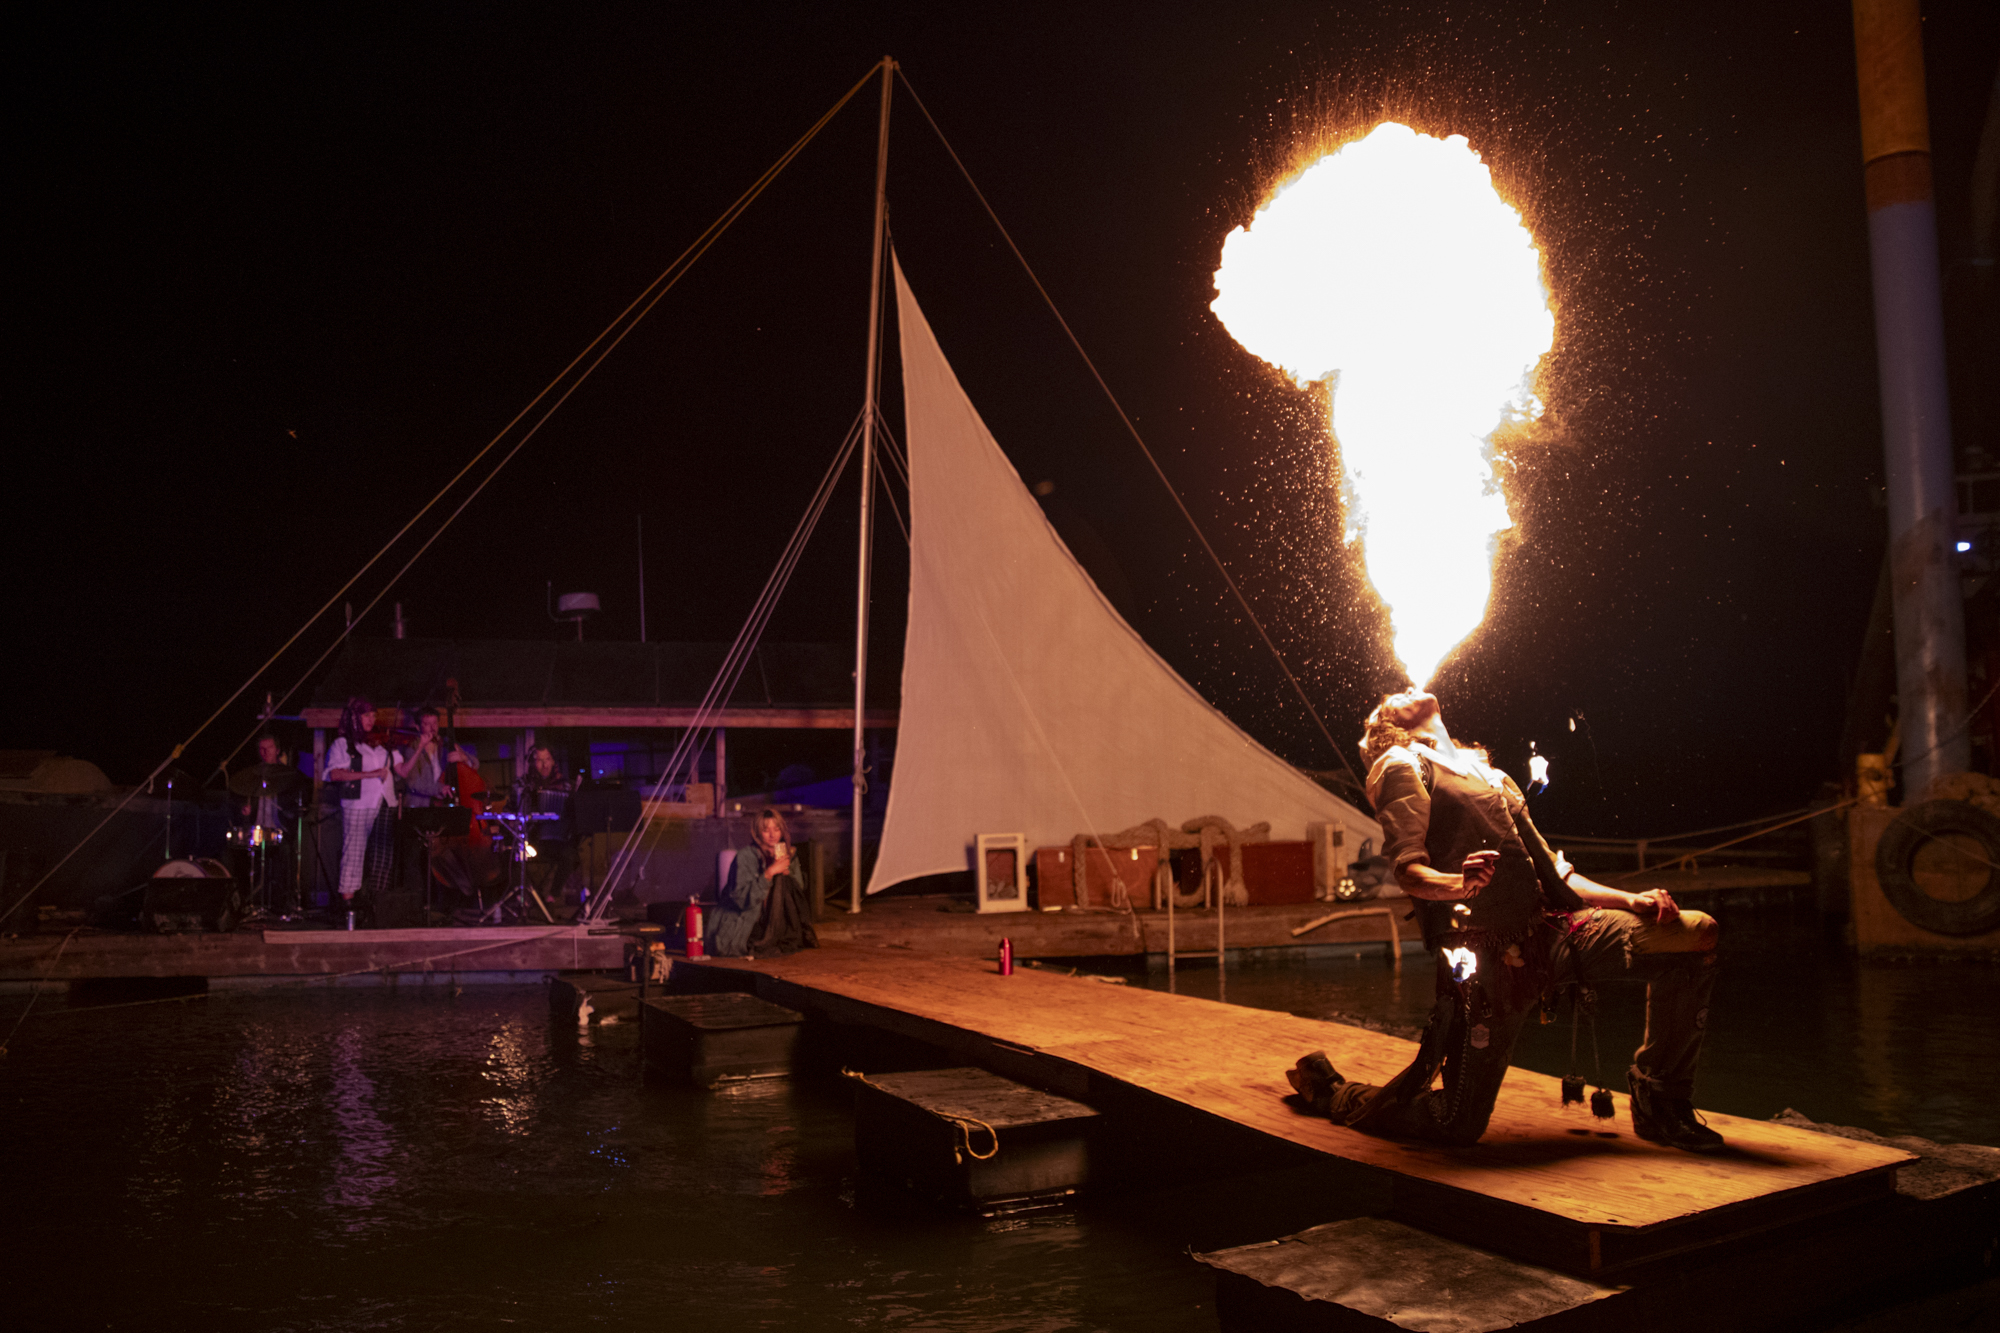 A person kneels and breathes fire at the end of a short jetty.